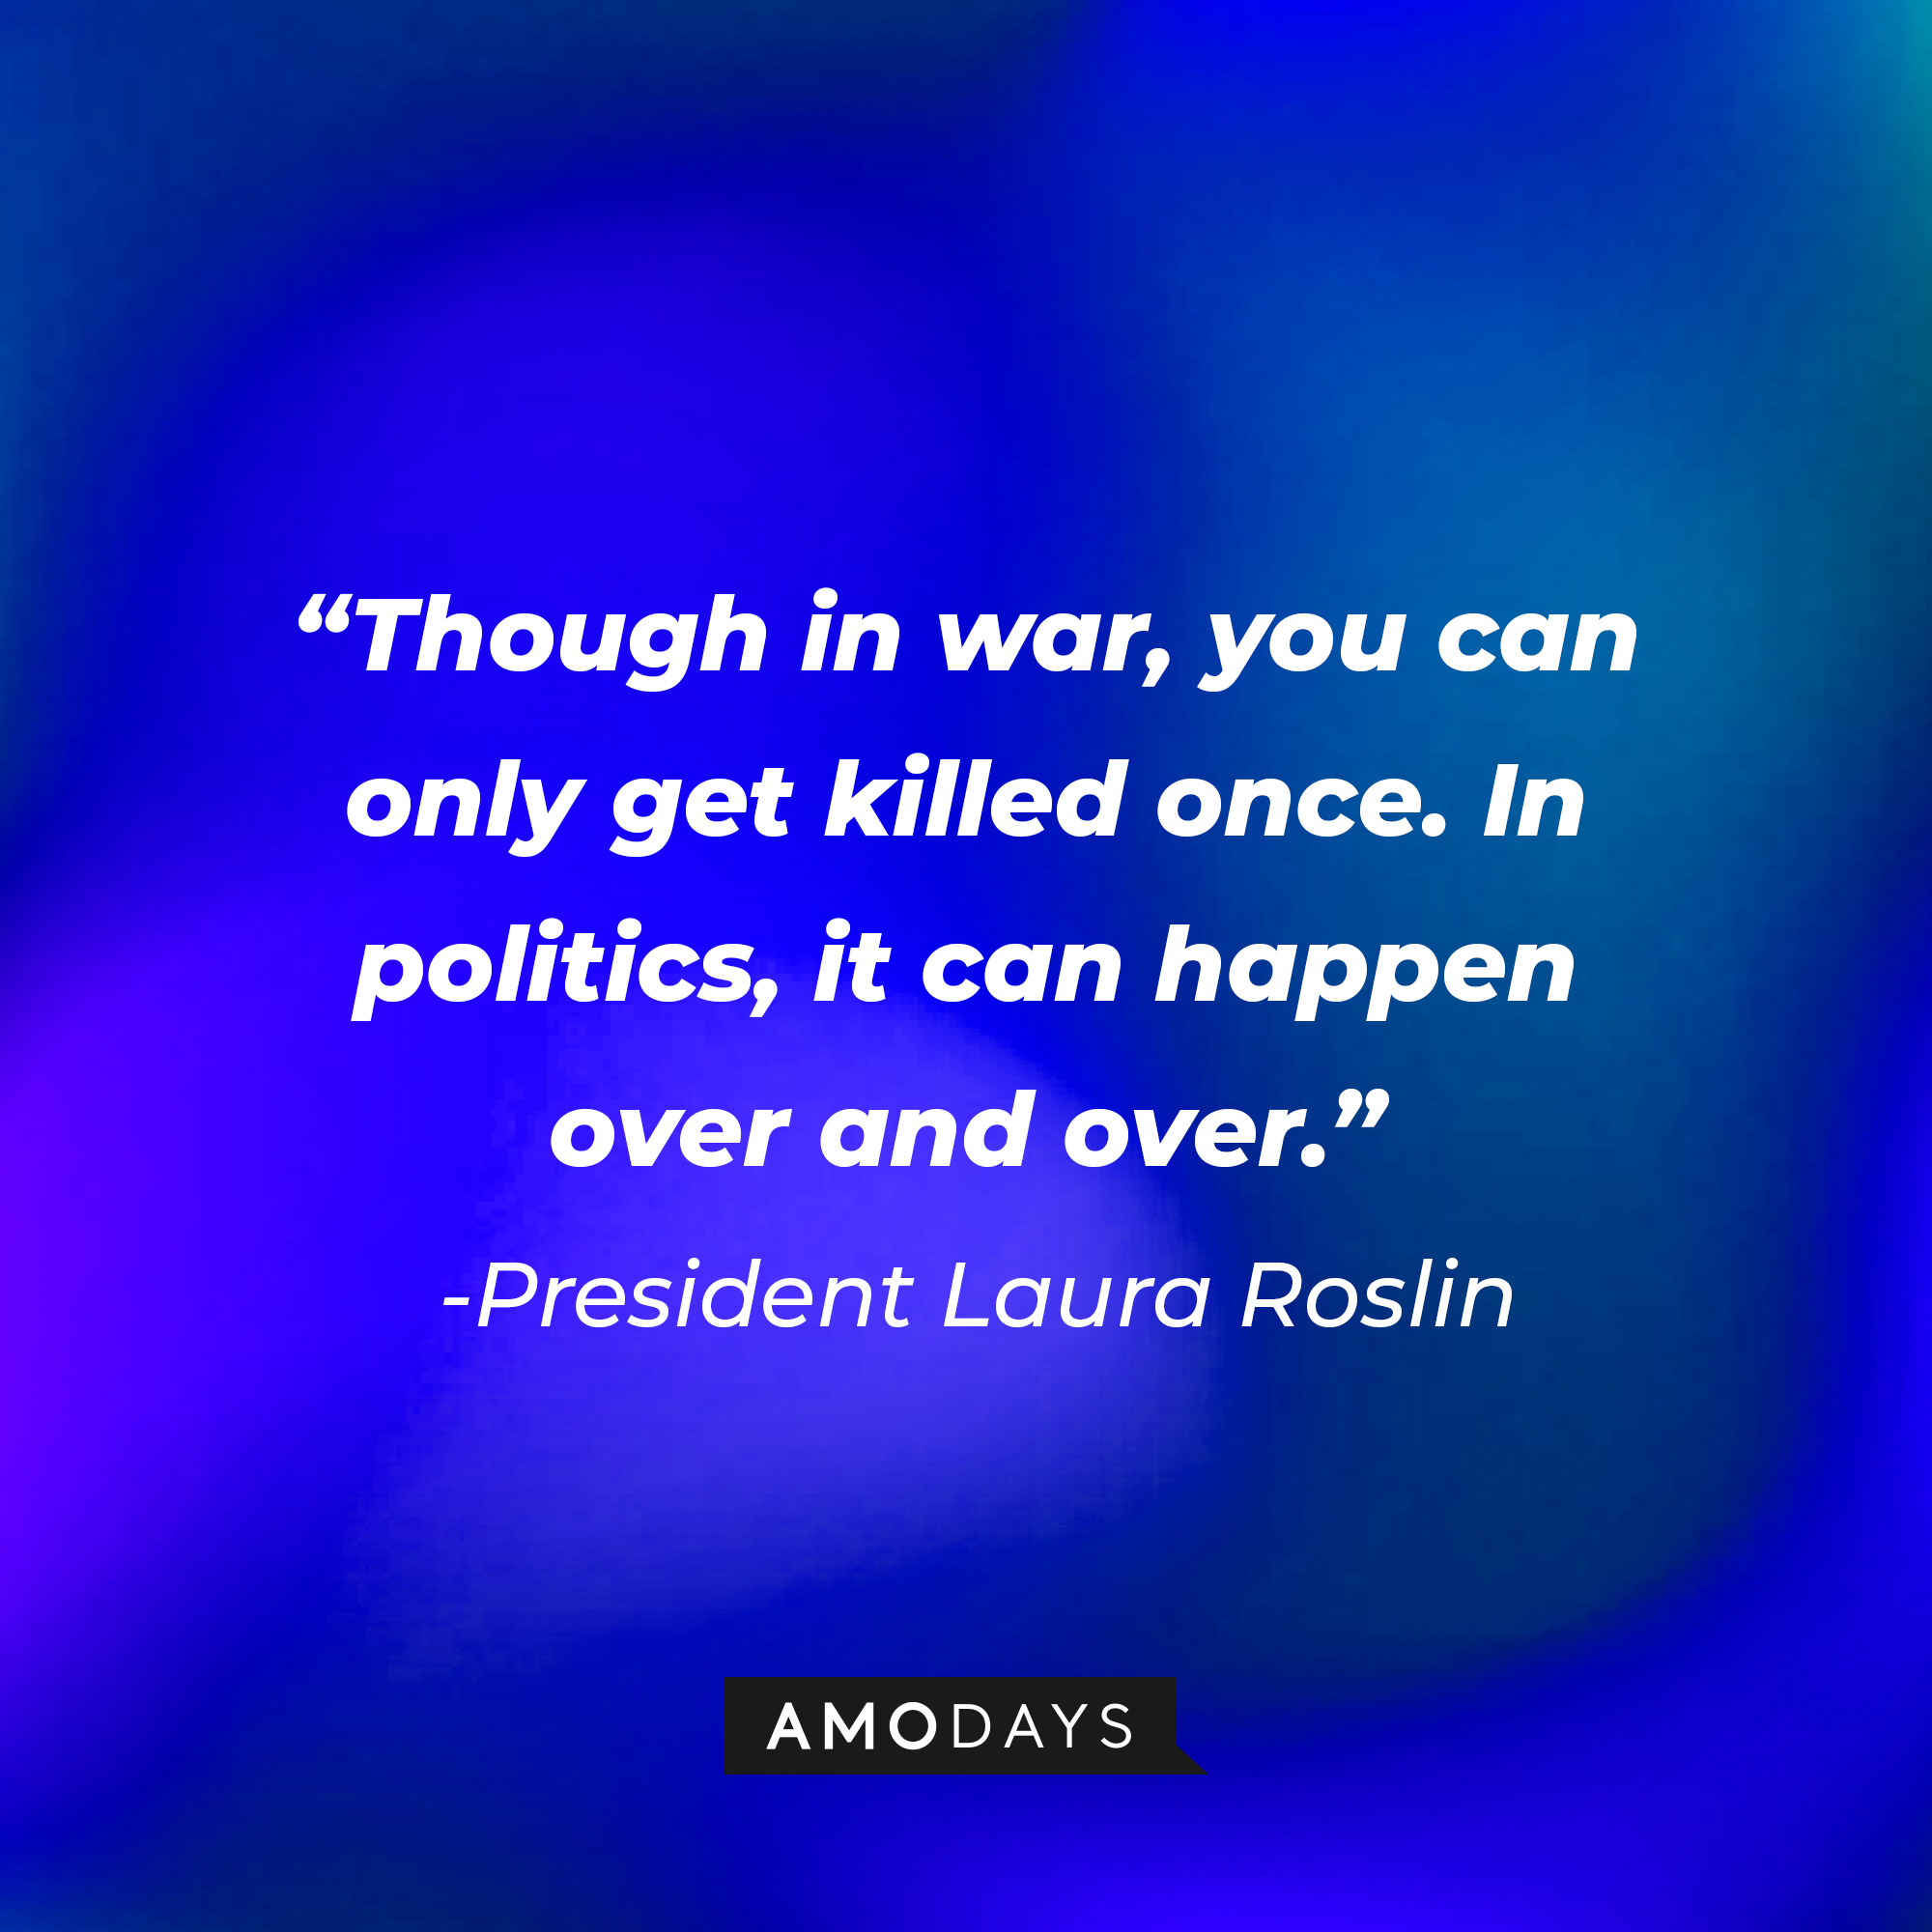 President Laura Roslin’s quote:“Though in war, you can only get killed once. In politics, it can happen over and over.” | Source: AmoDays